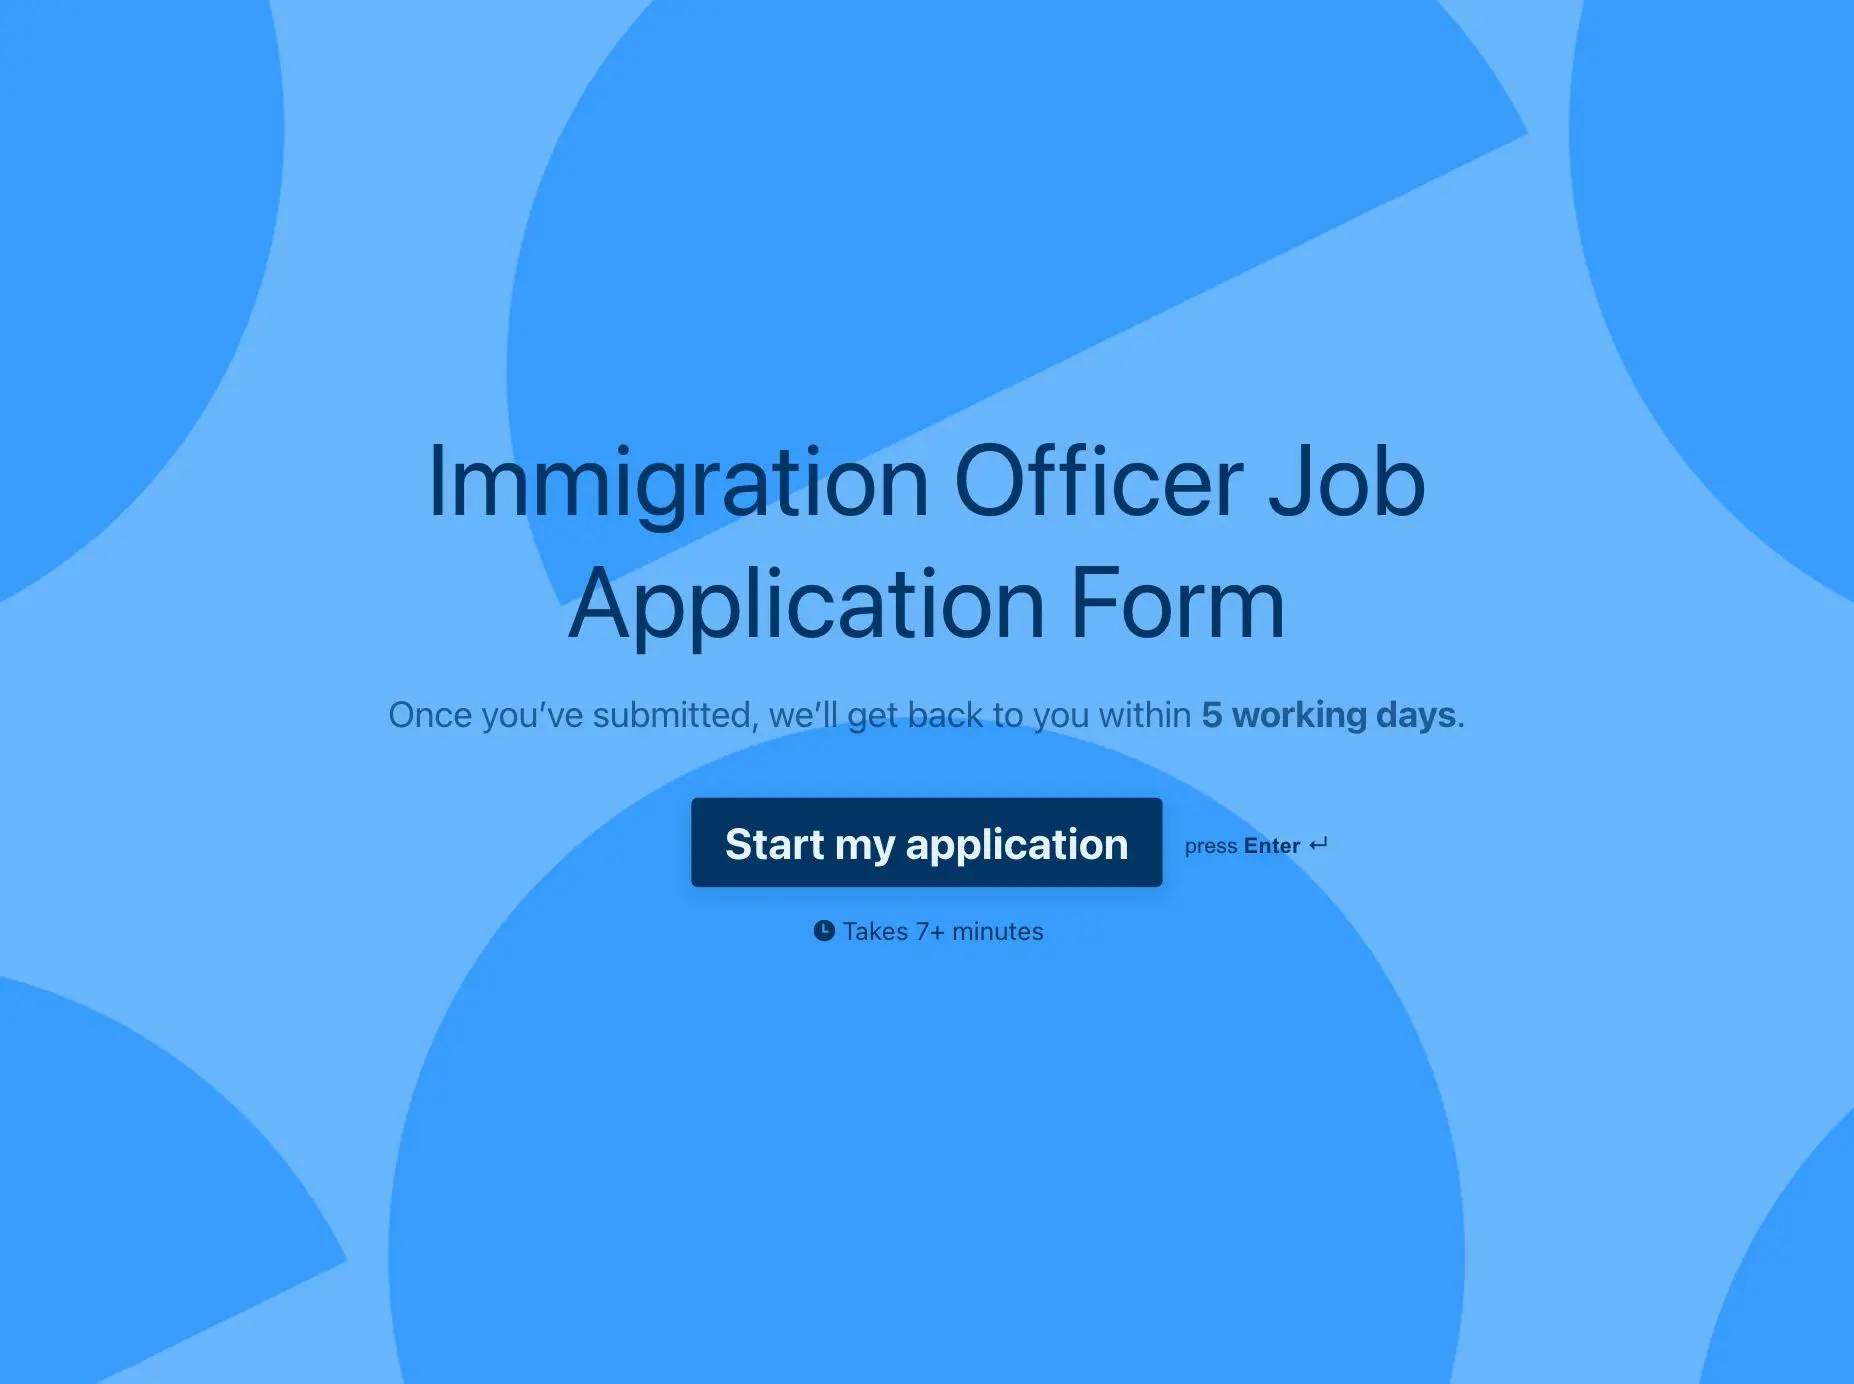 Immigration officer job application form template Hero